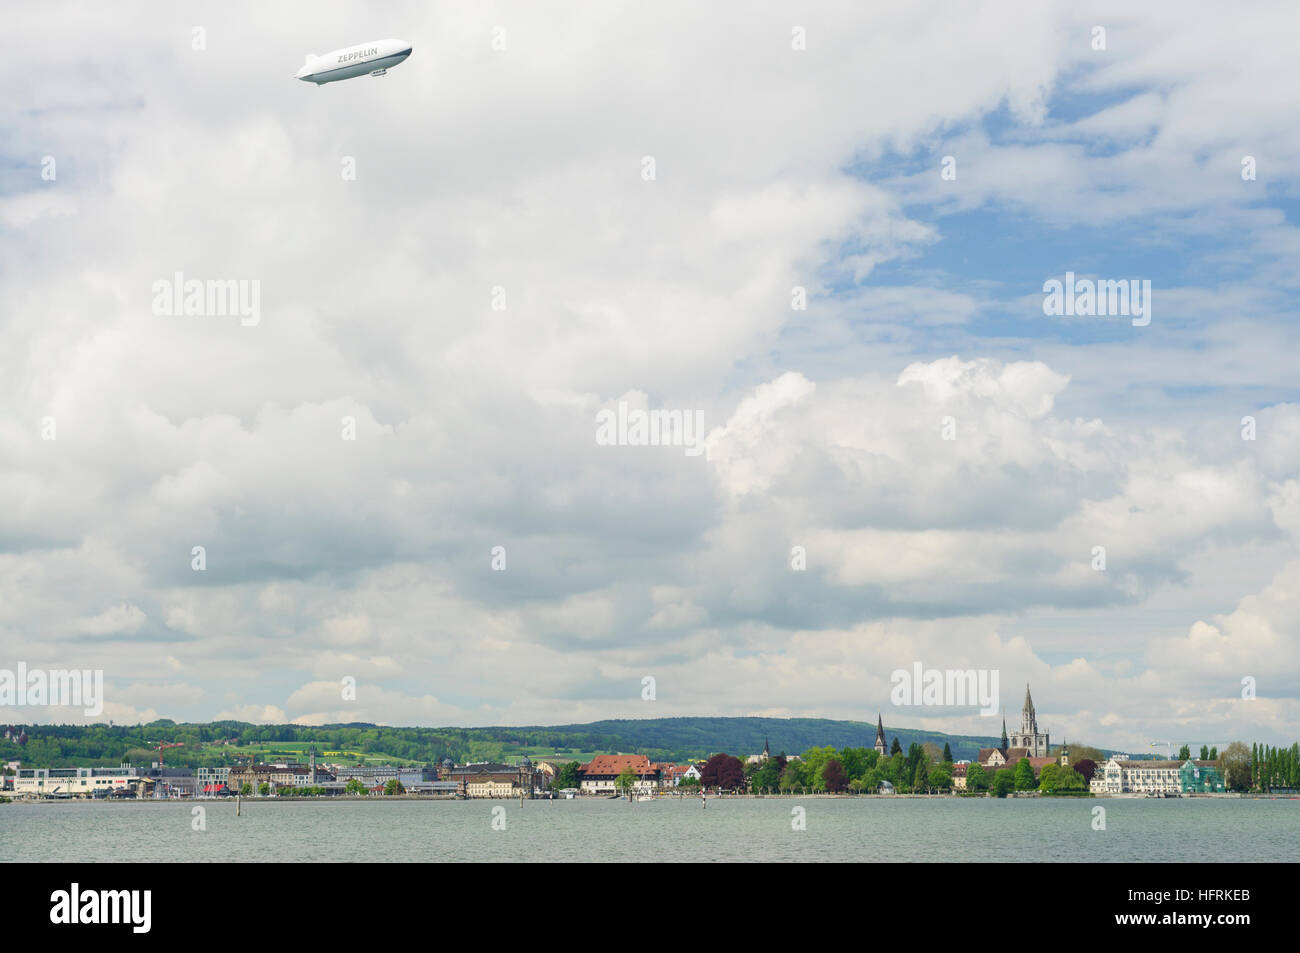 Konstanz, Constance: Lake Constance with a view of Constance with Zeppelin NT, minster Of Our Lady, Bodensee, Lake Constance, Baden-Württemberg, Germa Stock Photo